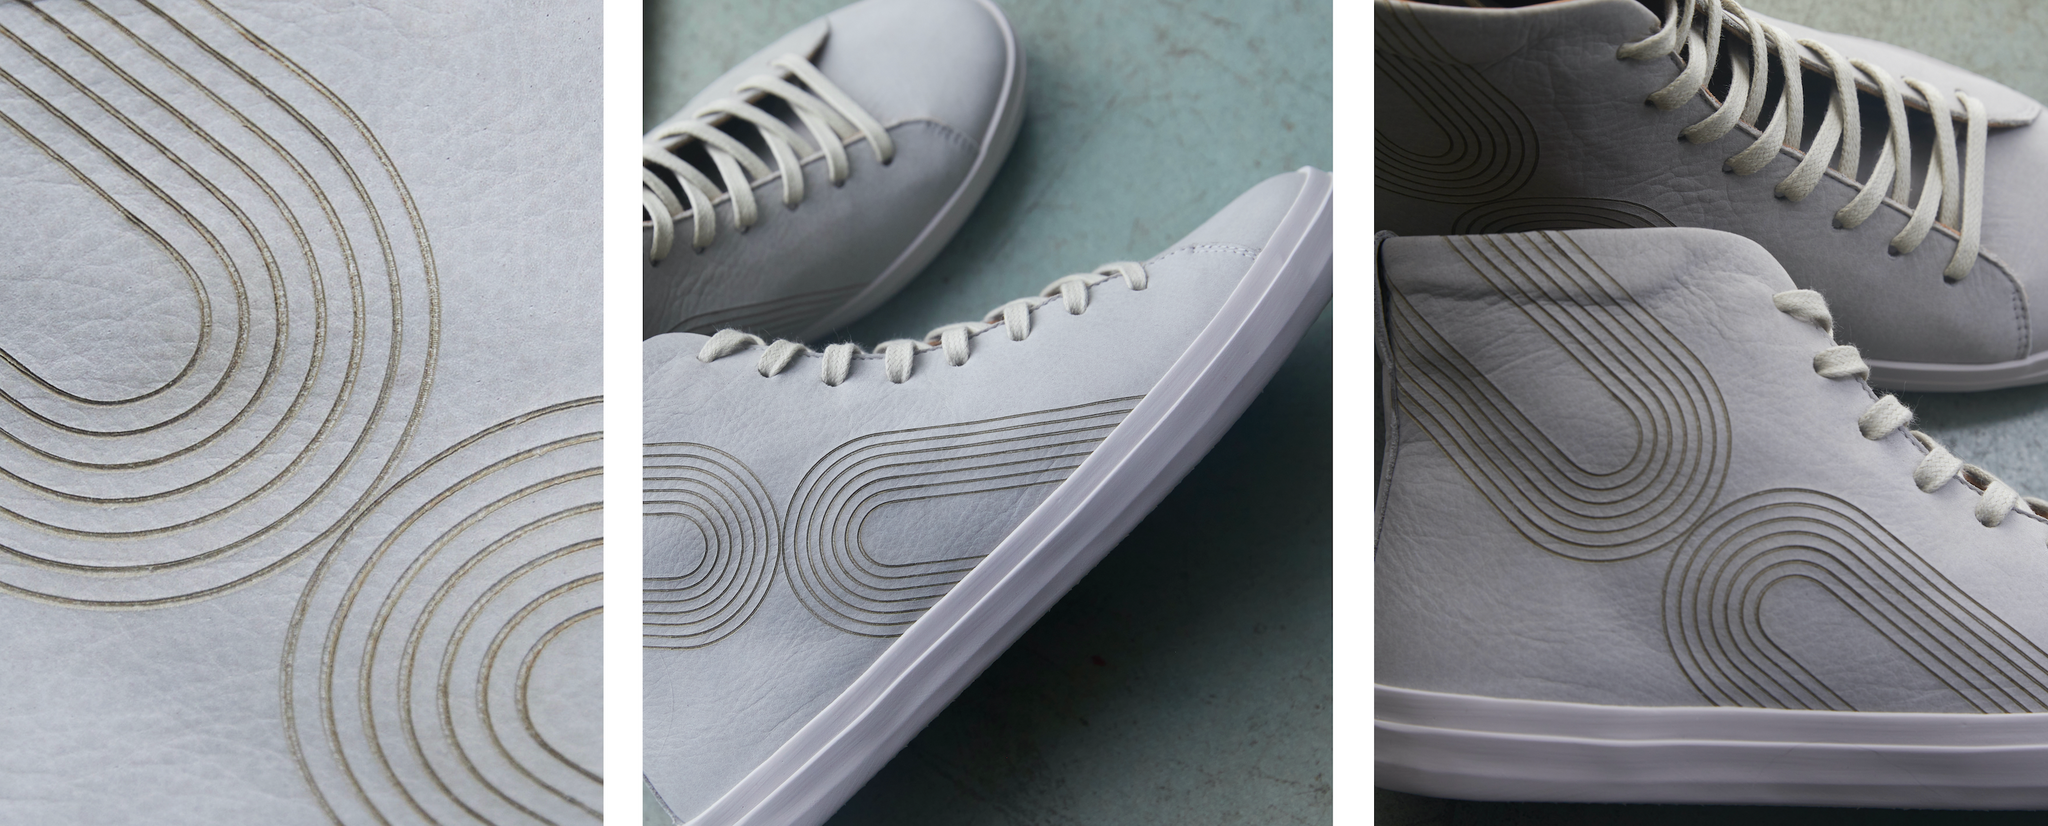 Three side-by-side images. (1) Close up of the laser embossed infinity arches on Perla nubuck. (2) The Oopsy High-top Sneaker in Perla leather. (3) Close up side view of the signature laser-embossed infinity arches on the Oopsy Sneaker. 